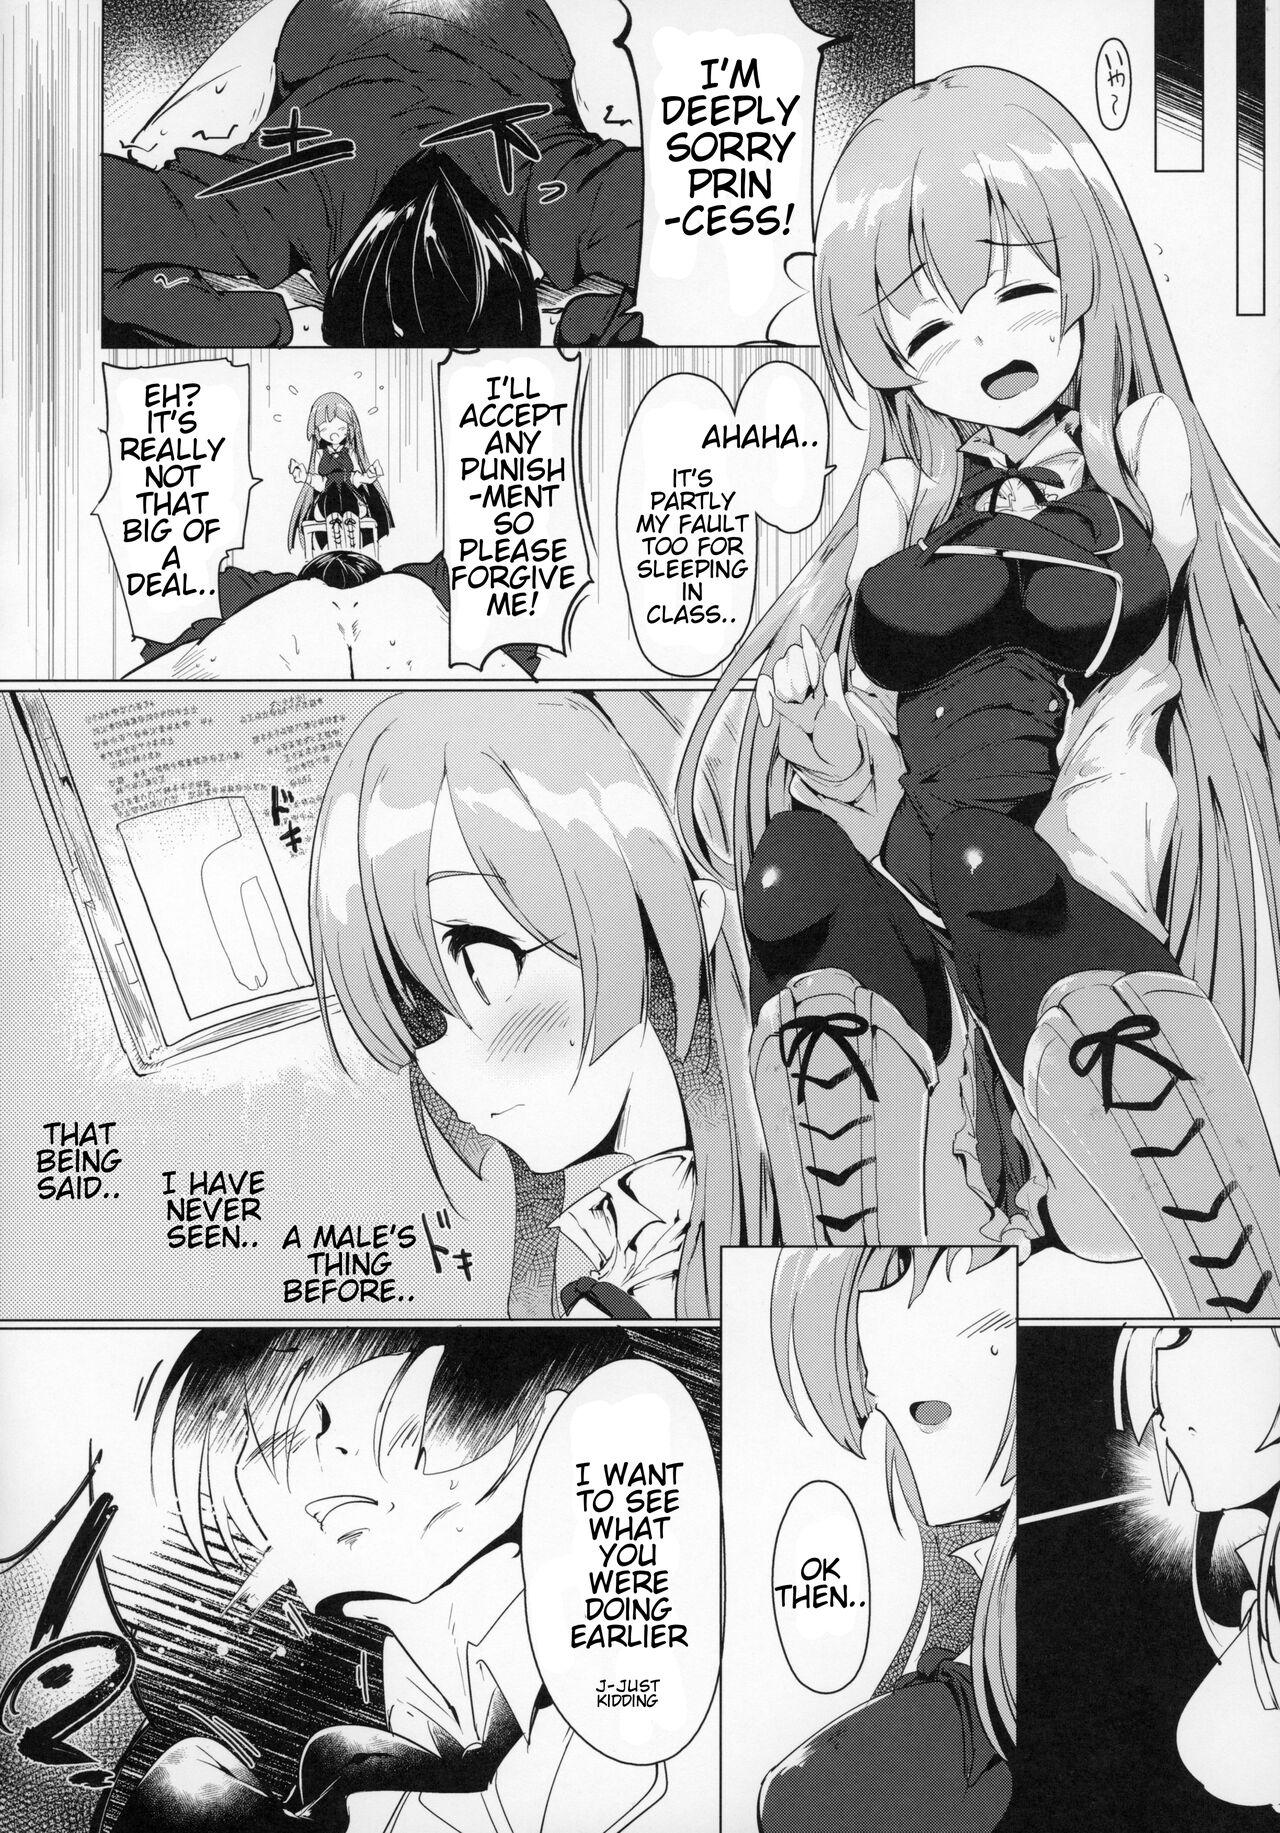 Doggystyle There's No Way An Ecchi Event Will Happen Between Me and the Princess of Manaria Kingdom! - Manaria friends Teenage Sex - Page 9